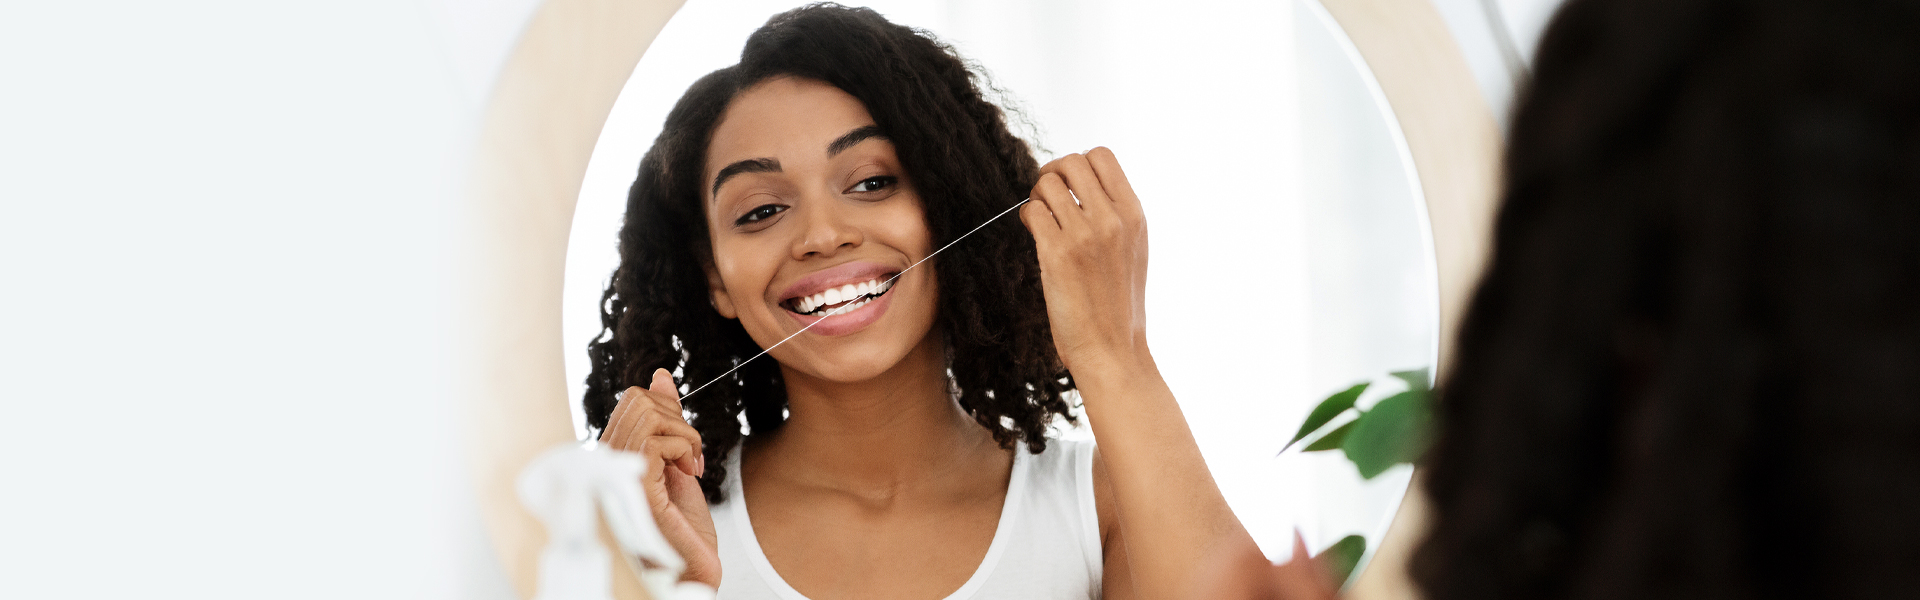 What Are the Benefits of Flossing?